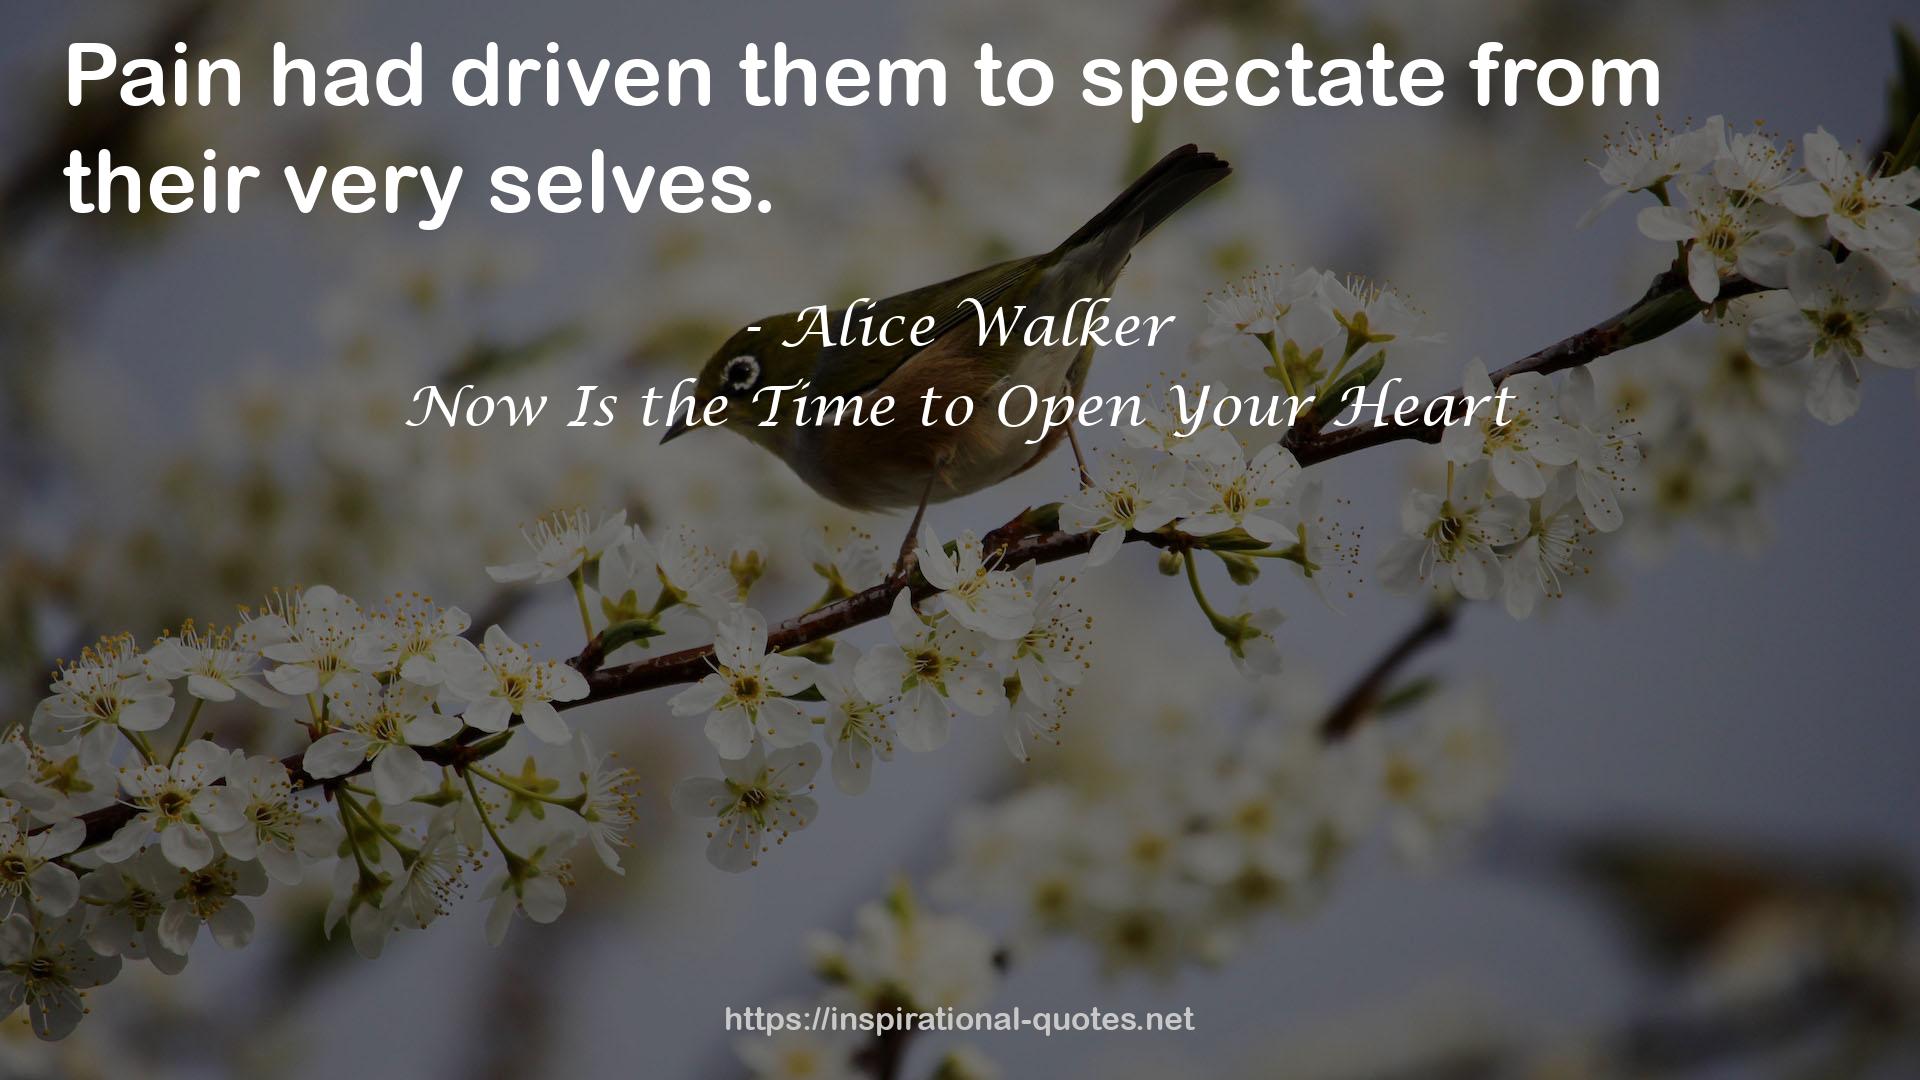 Now Is the Time to Open Your Heart QUOTES